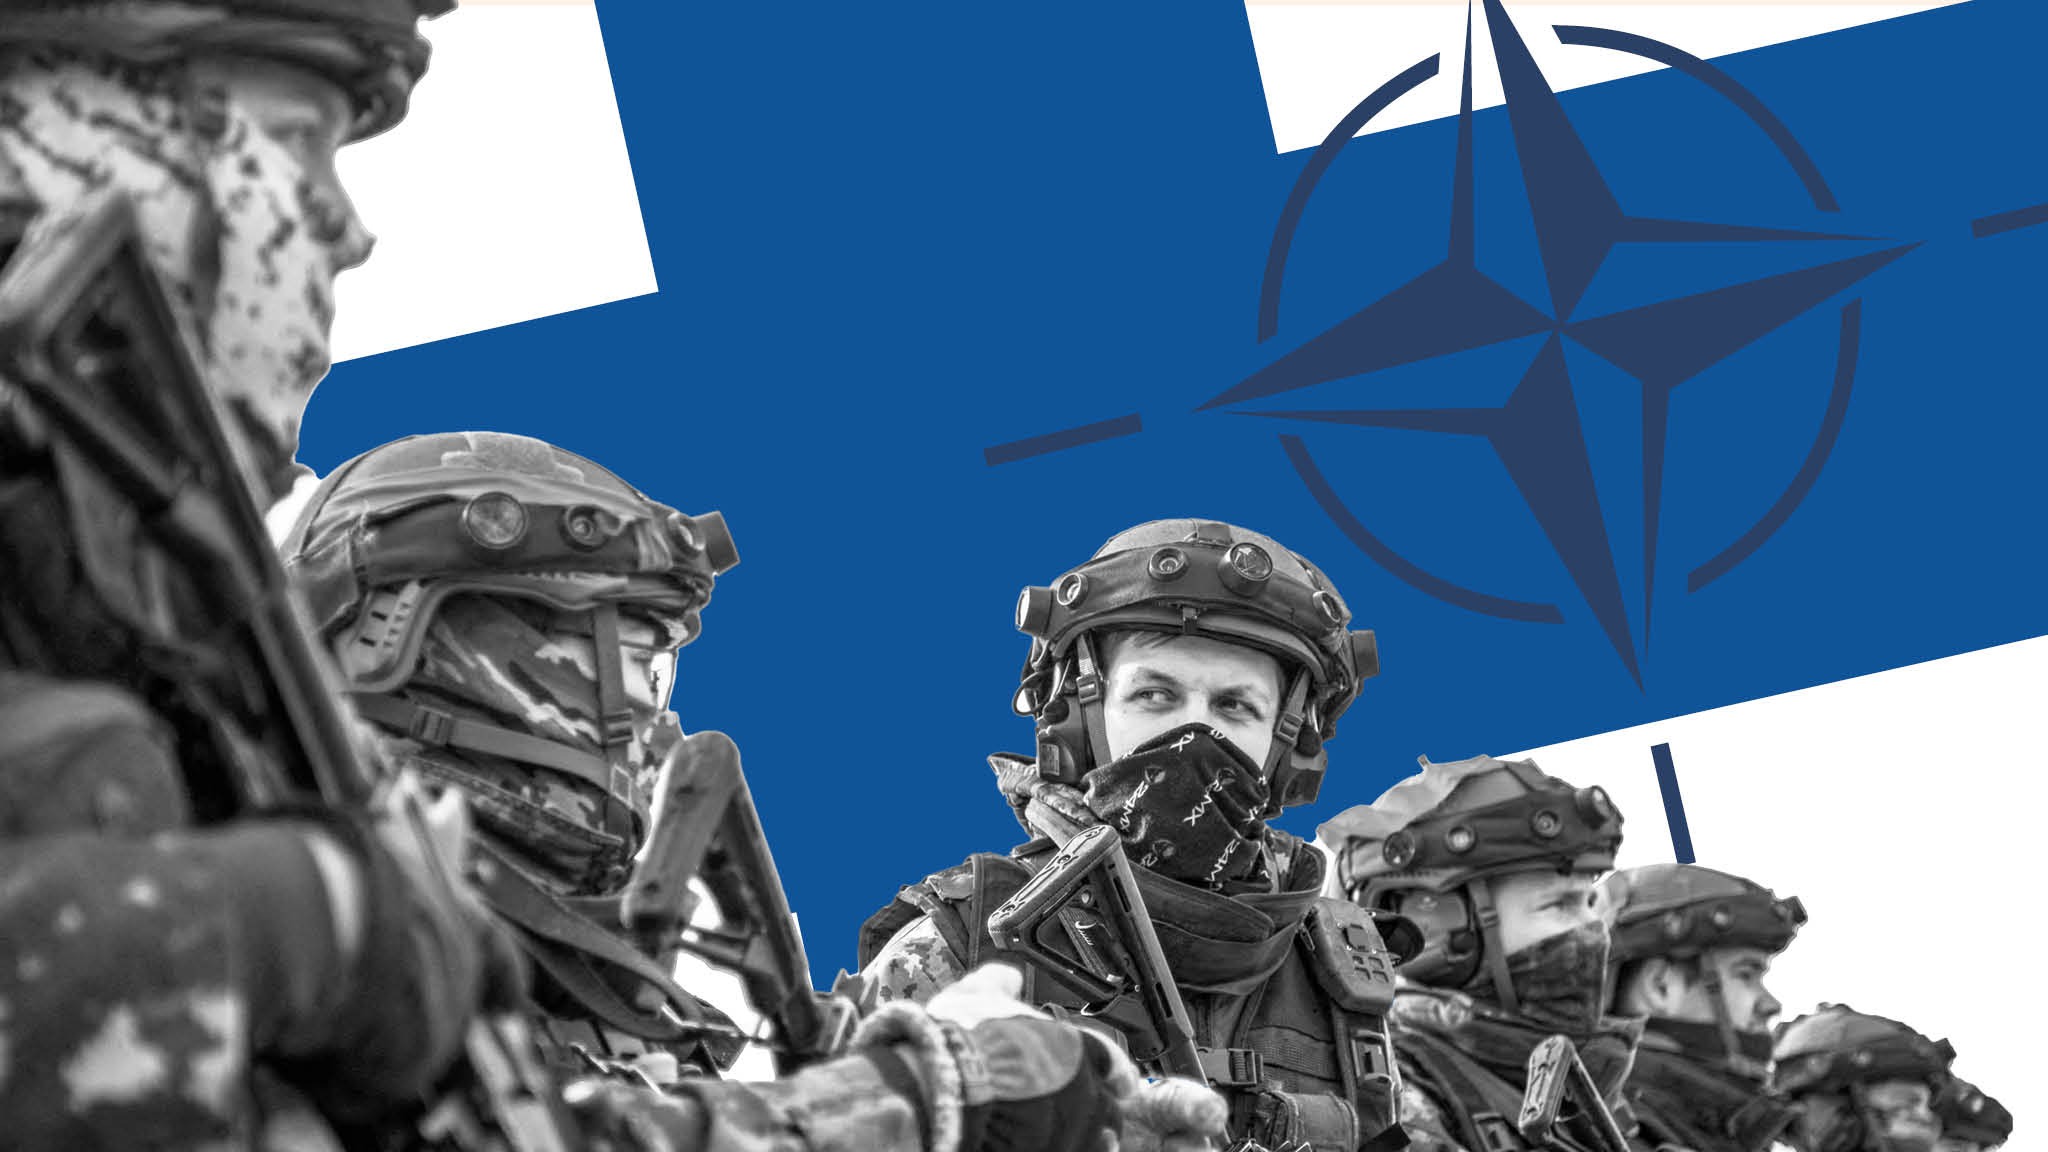 It's a radical change': The prospect of Finland joining Nato draws nearer |  Financial Times